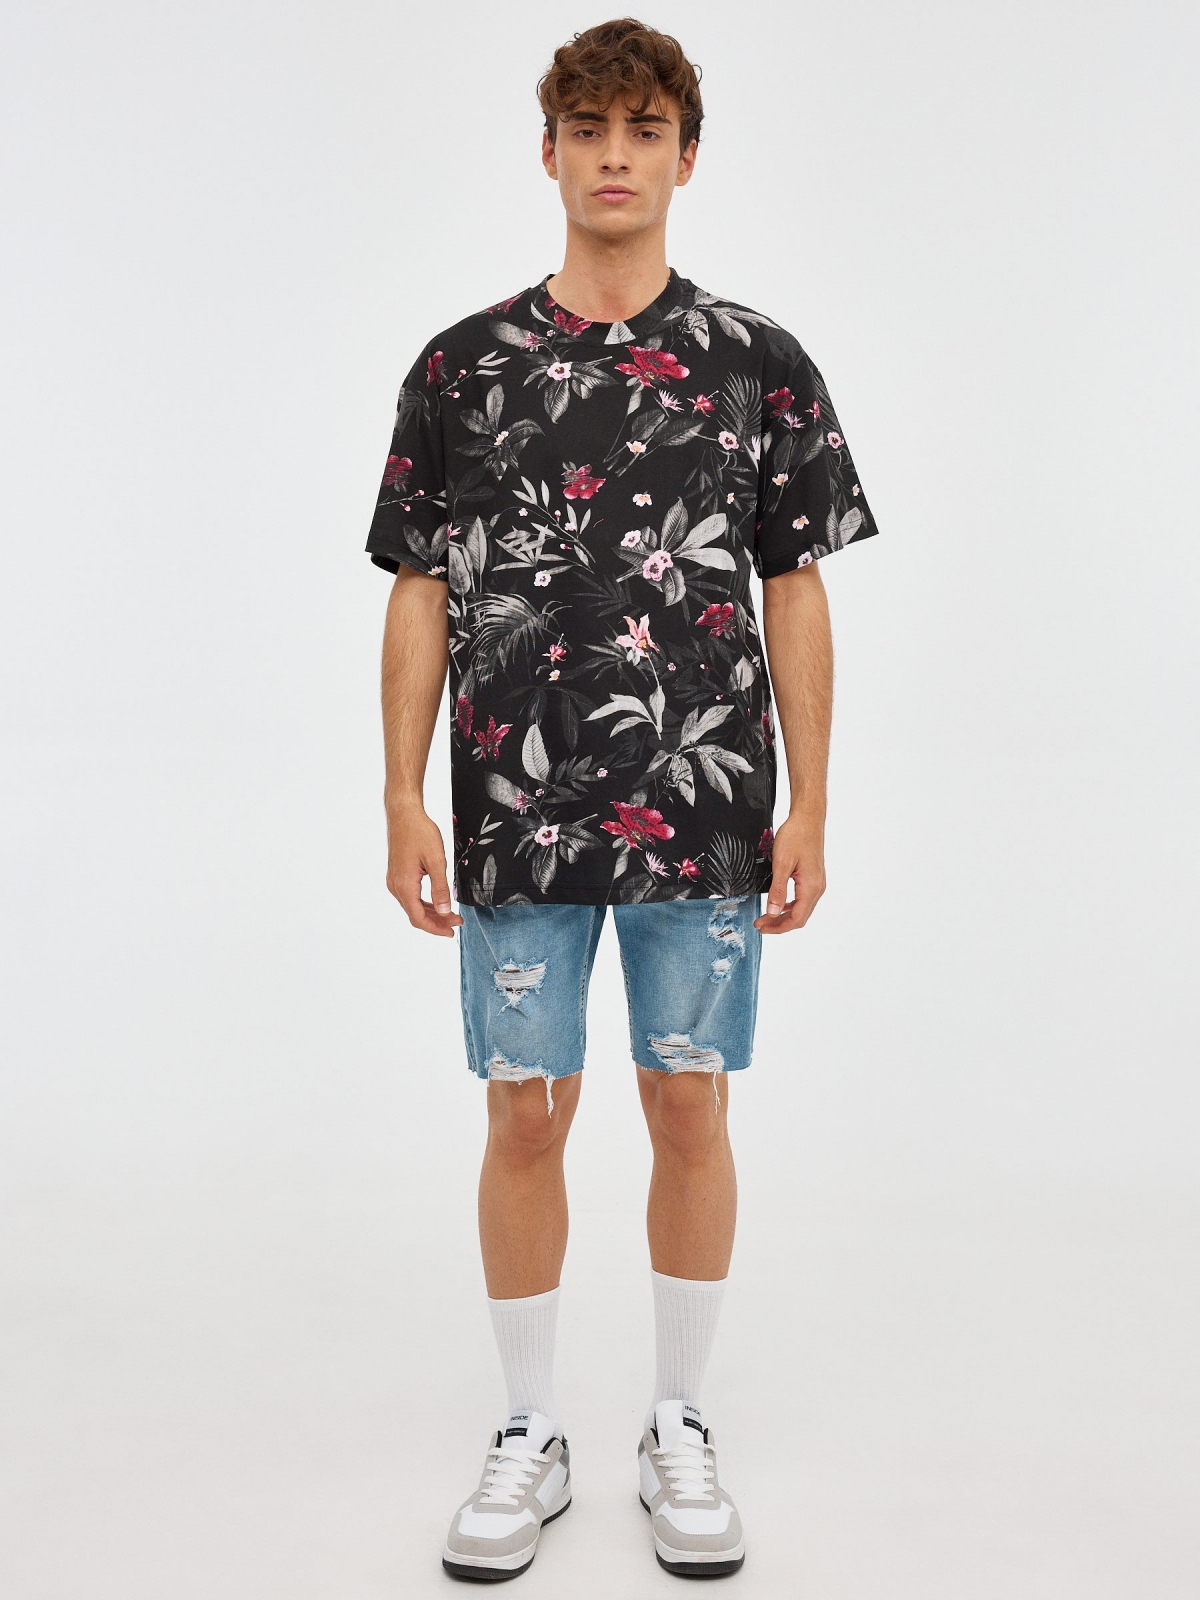 Oversized floral t-shirt black front view